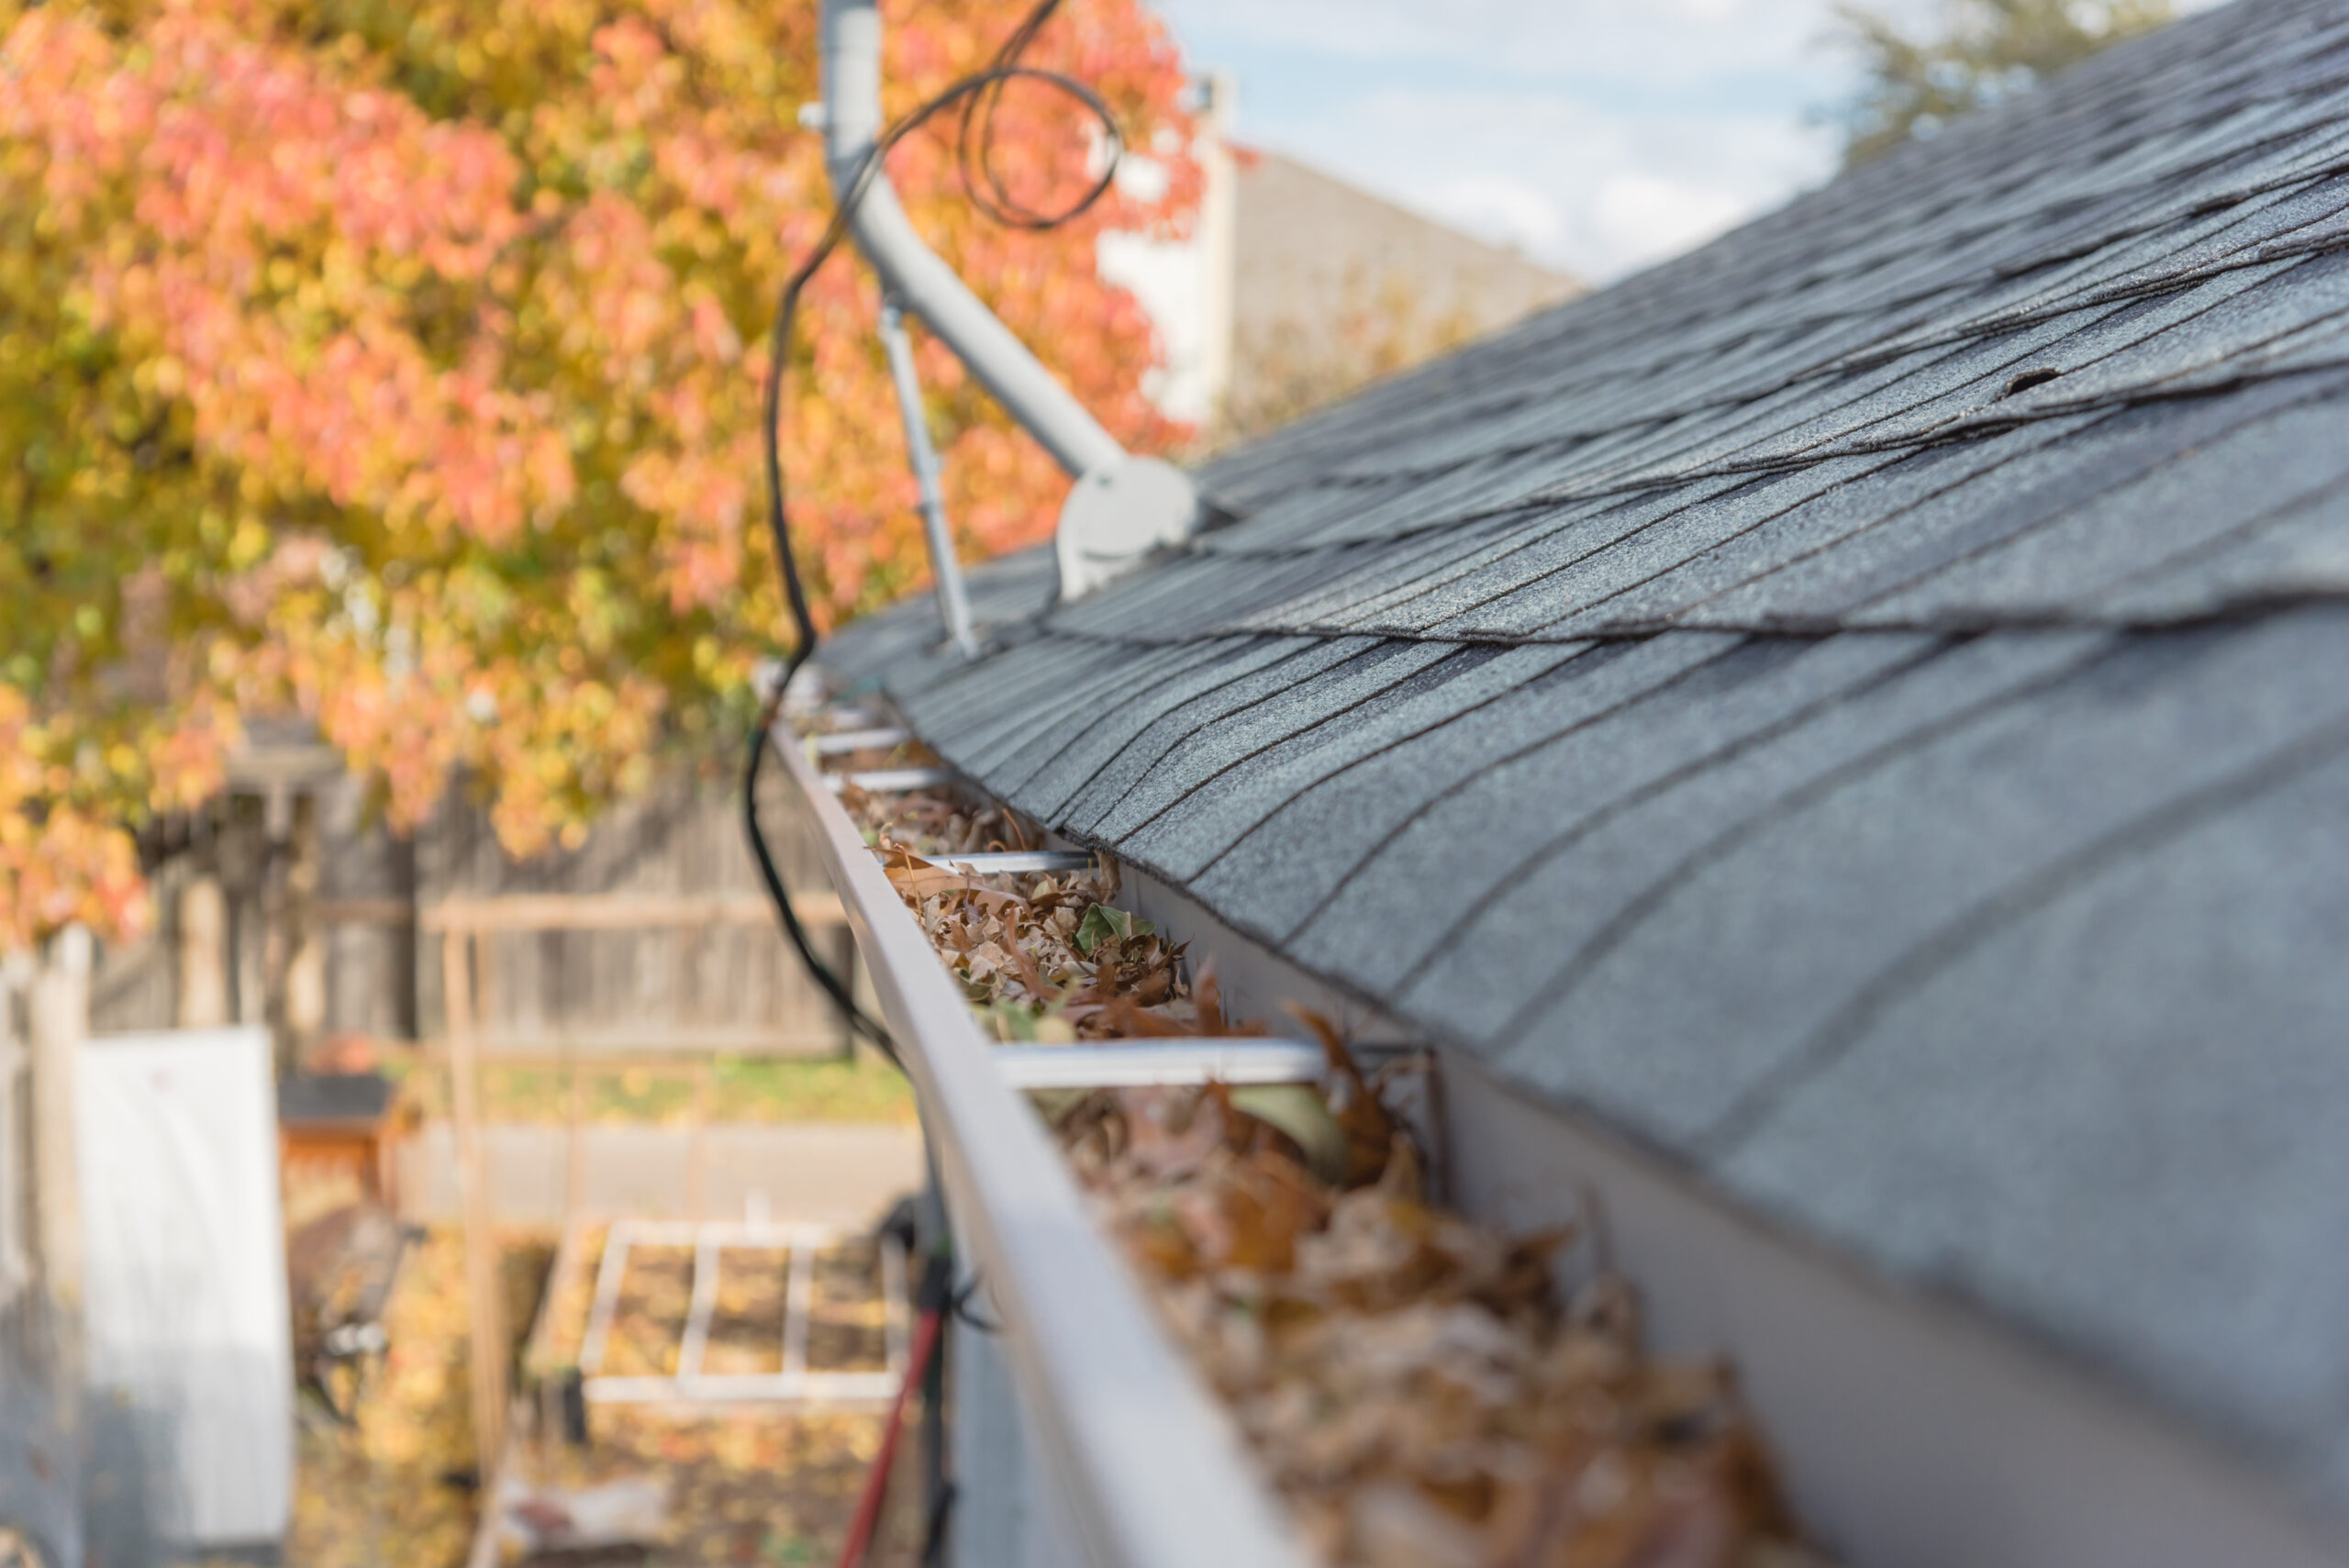 Clogged gutter near roof shingles with colorful fall foliage in background